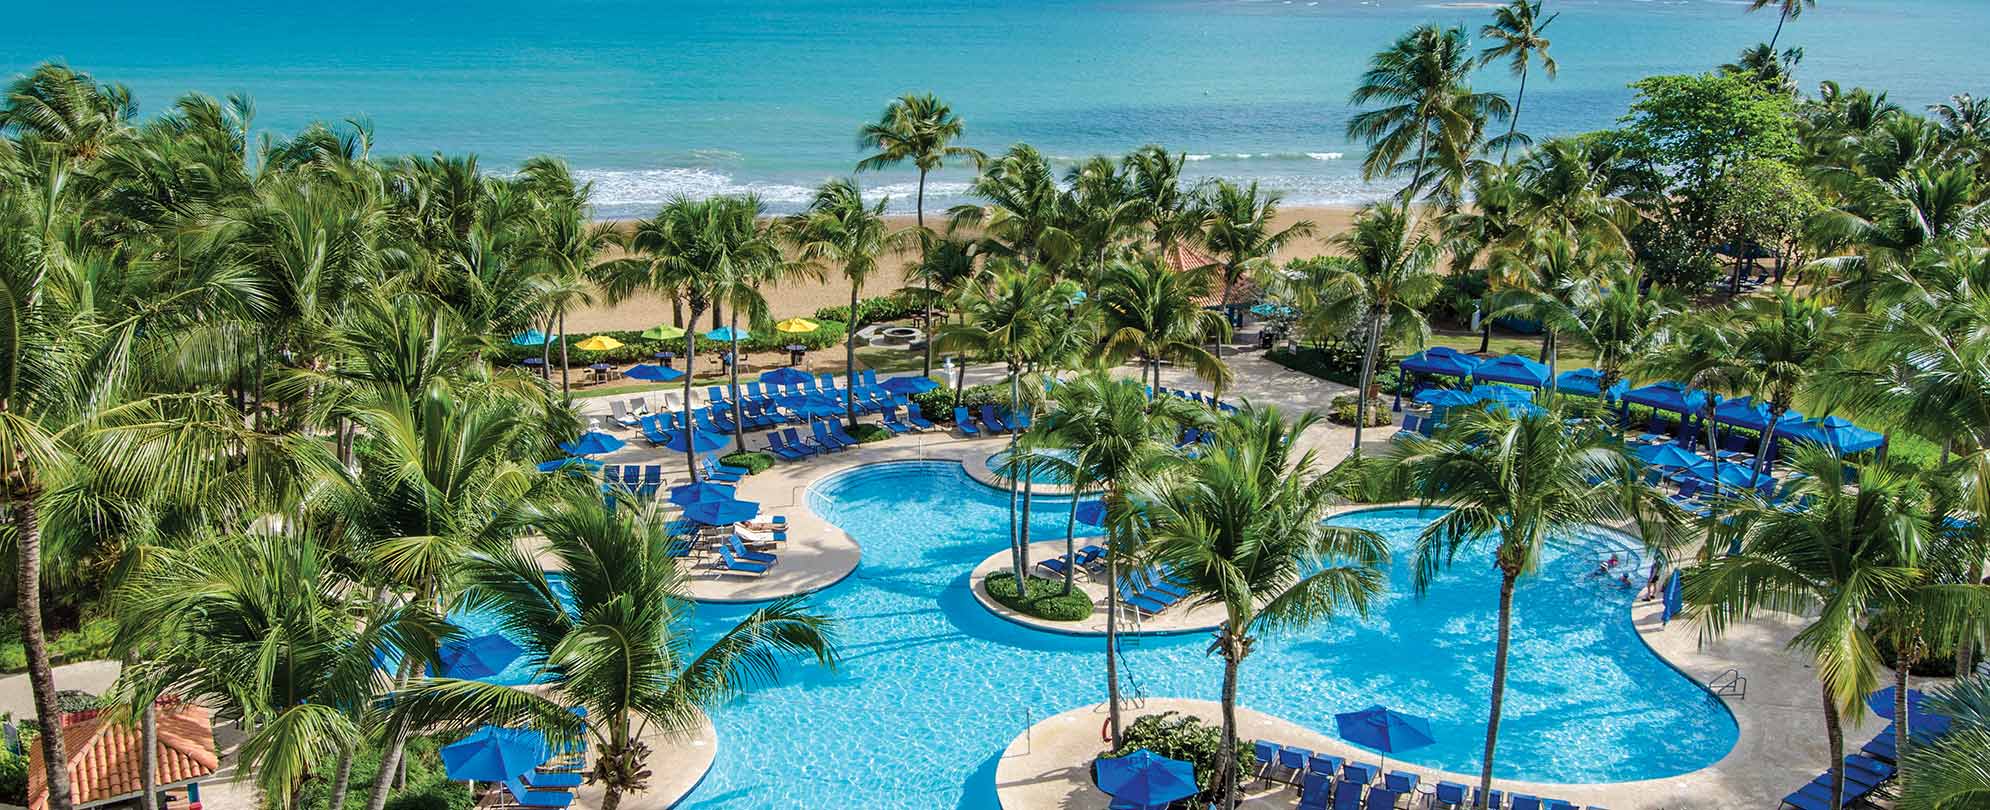 An oceanfront pool surrounded by palm trees at Margaritaville Vacation Club by Wyndham - Rio Mar, a timeshare resort.